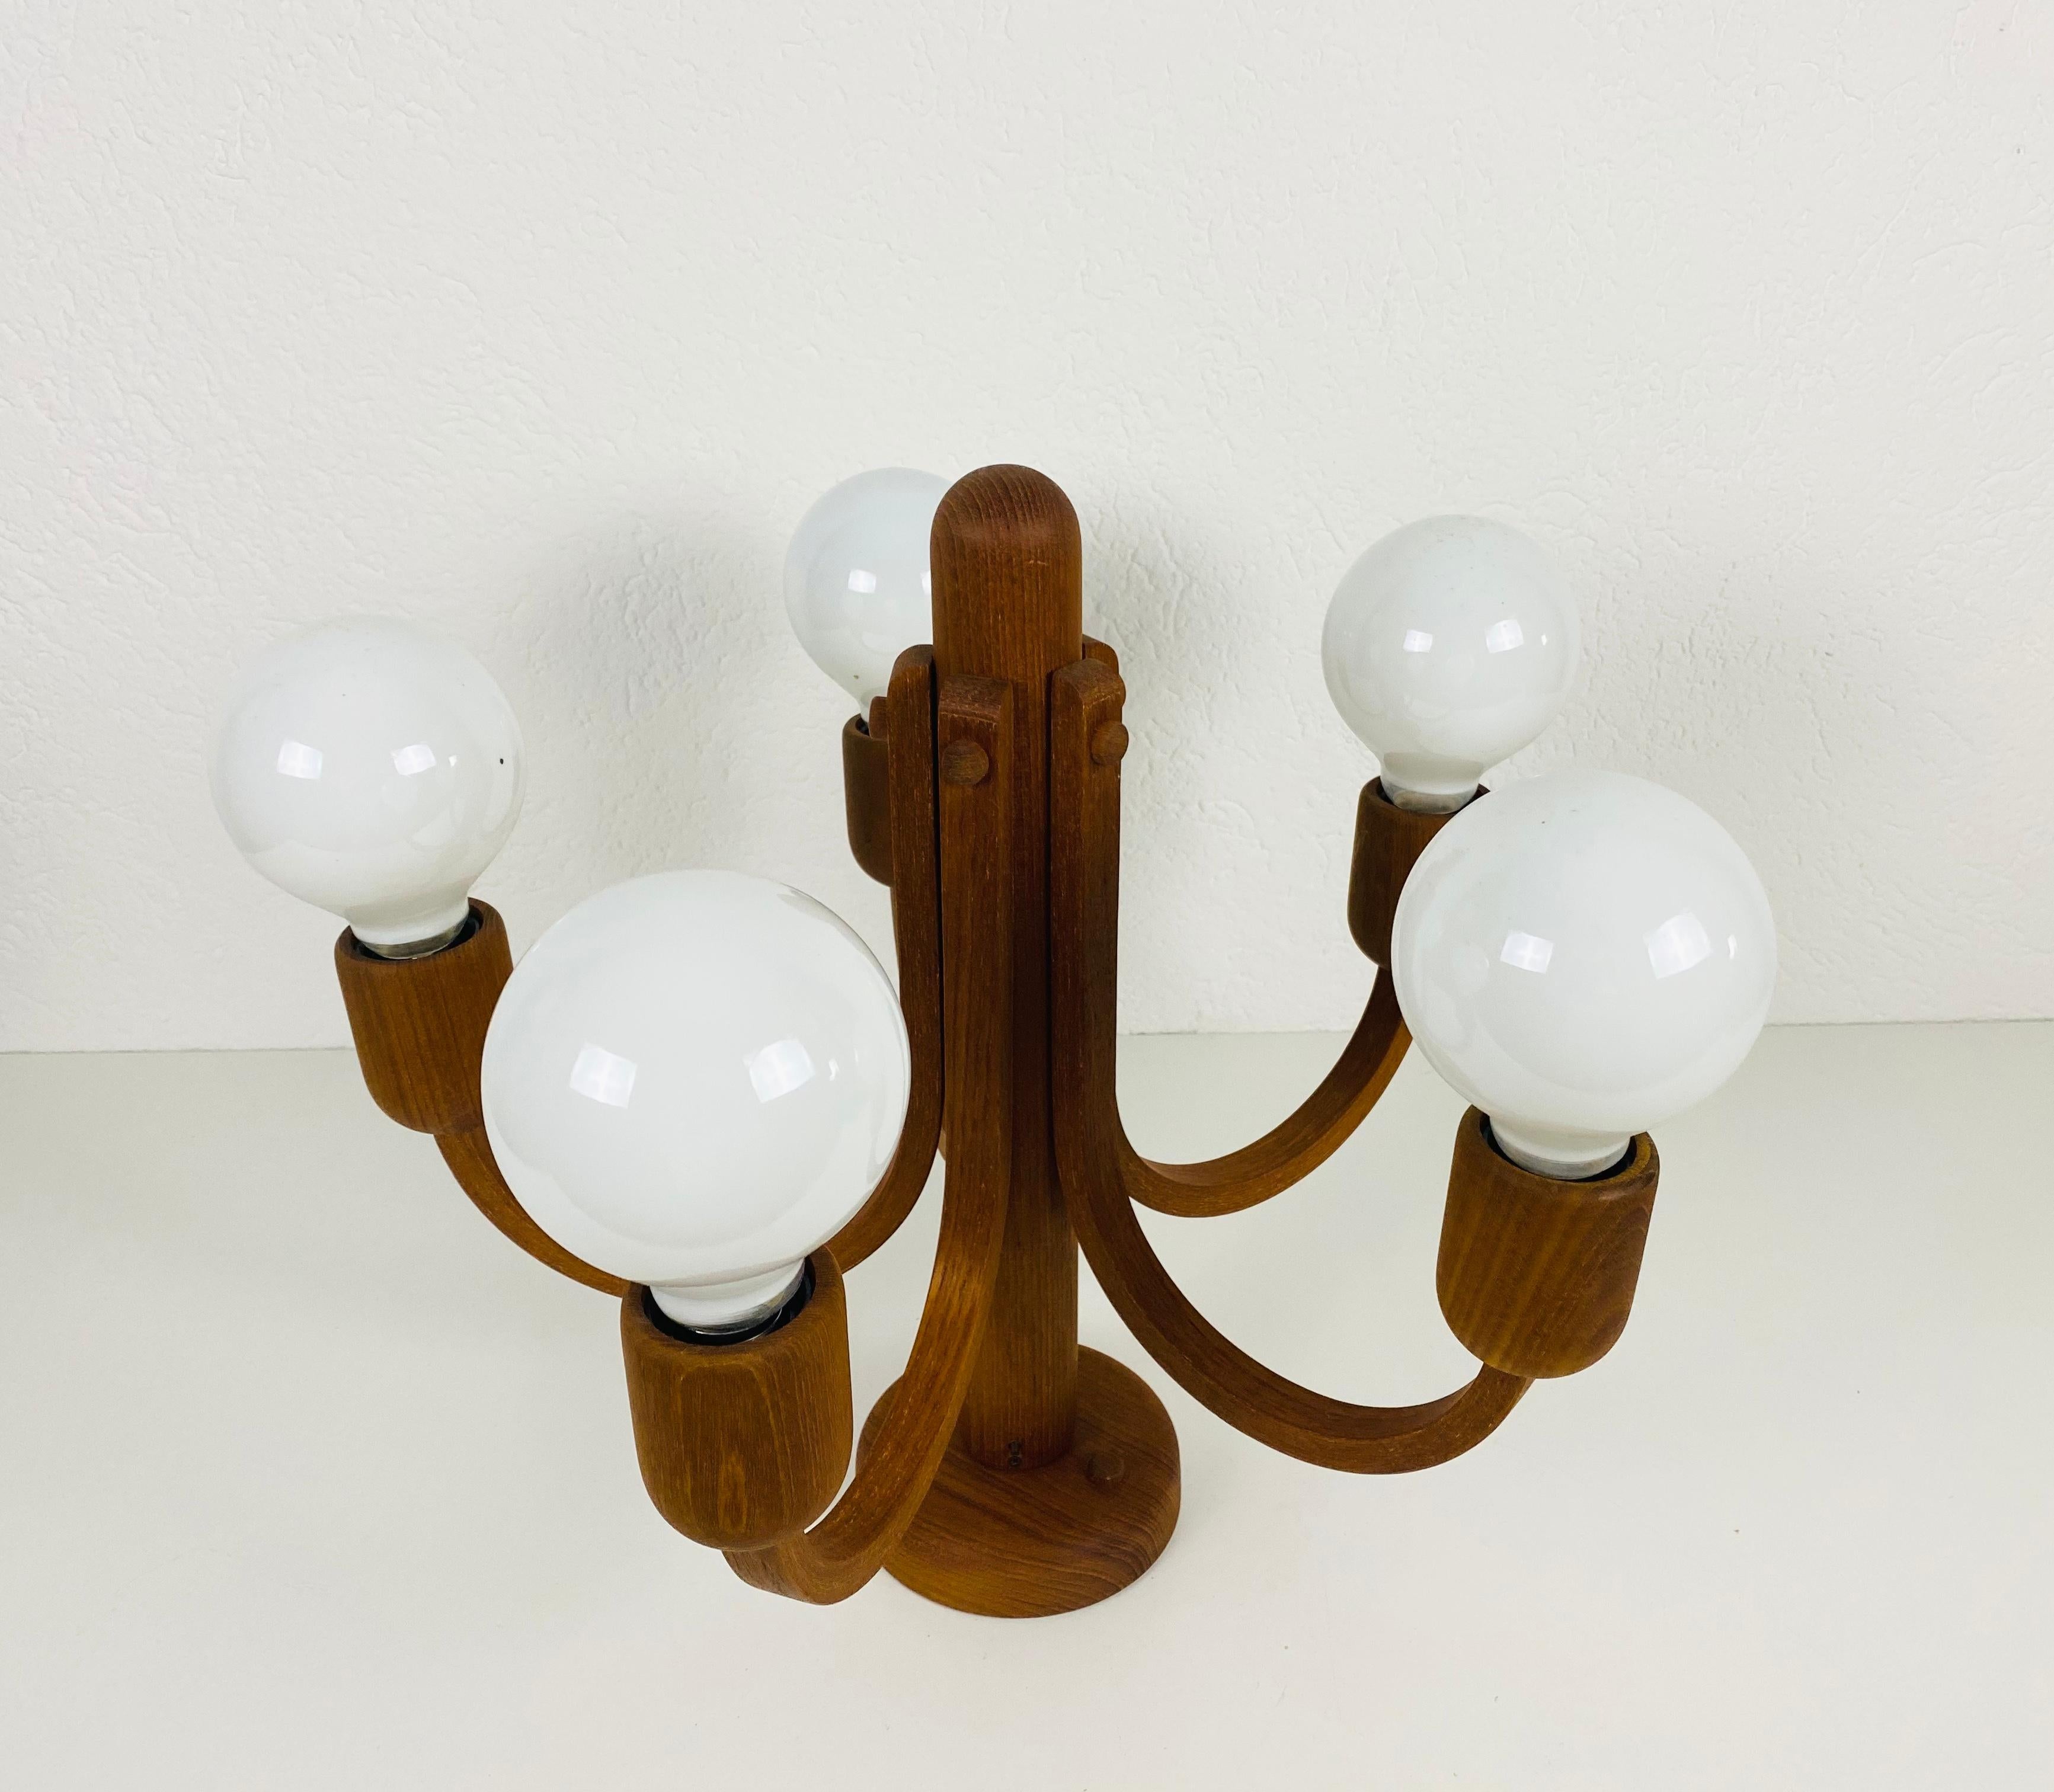 A wooden pendant lamp by Domus made in the 1960s. The body of the lamp is teak. The lamp has a wonderful Scandinavian design. 

Measurements:
Height 42 cm
Diameter 42 cm



The light requires 5 E27 (US E26) light bulbs. Works with both